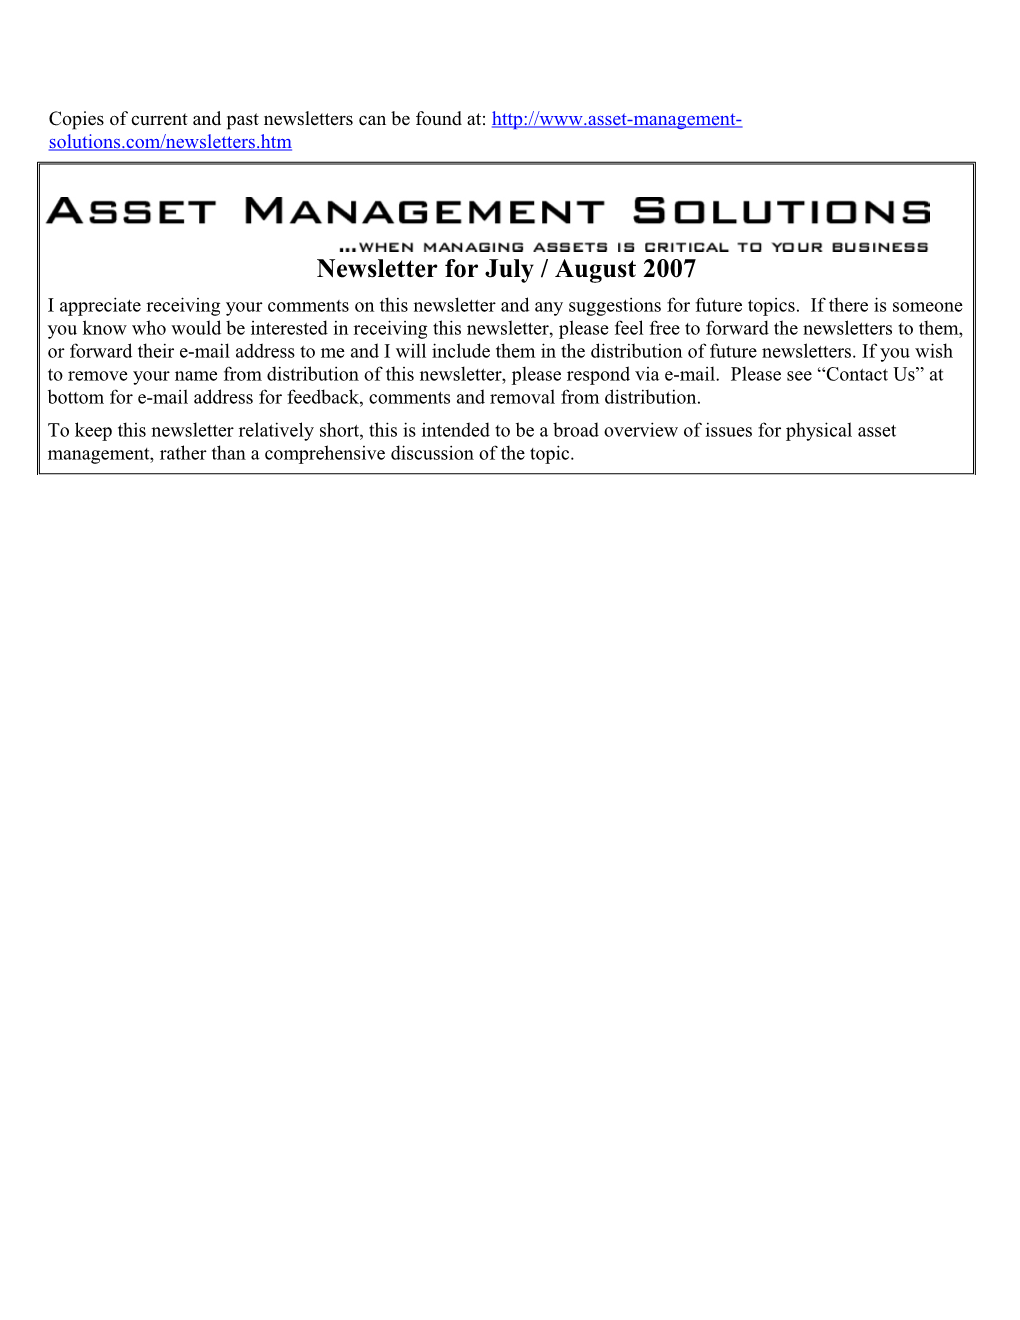 Asset Management Solutions Newsletter for July / August 2007